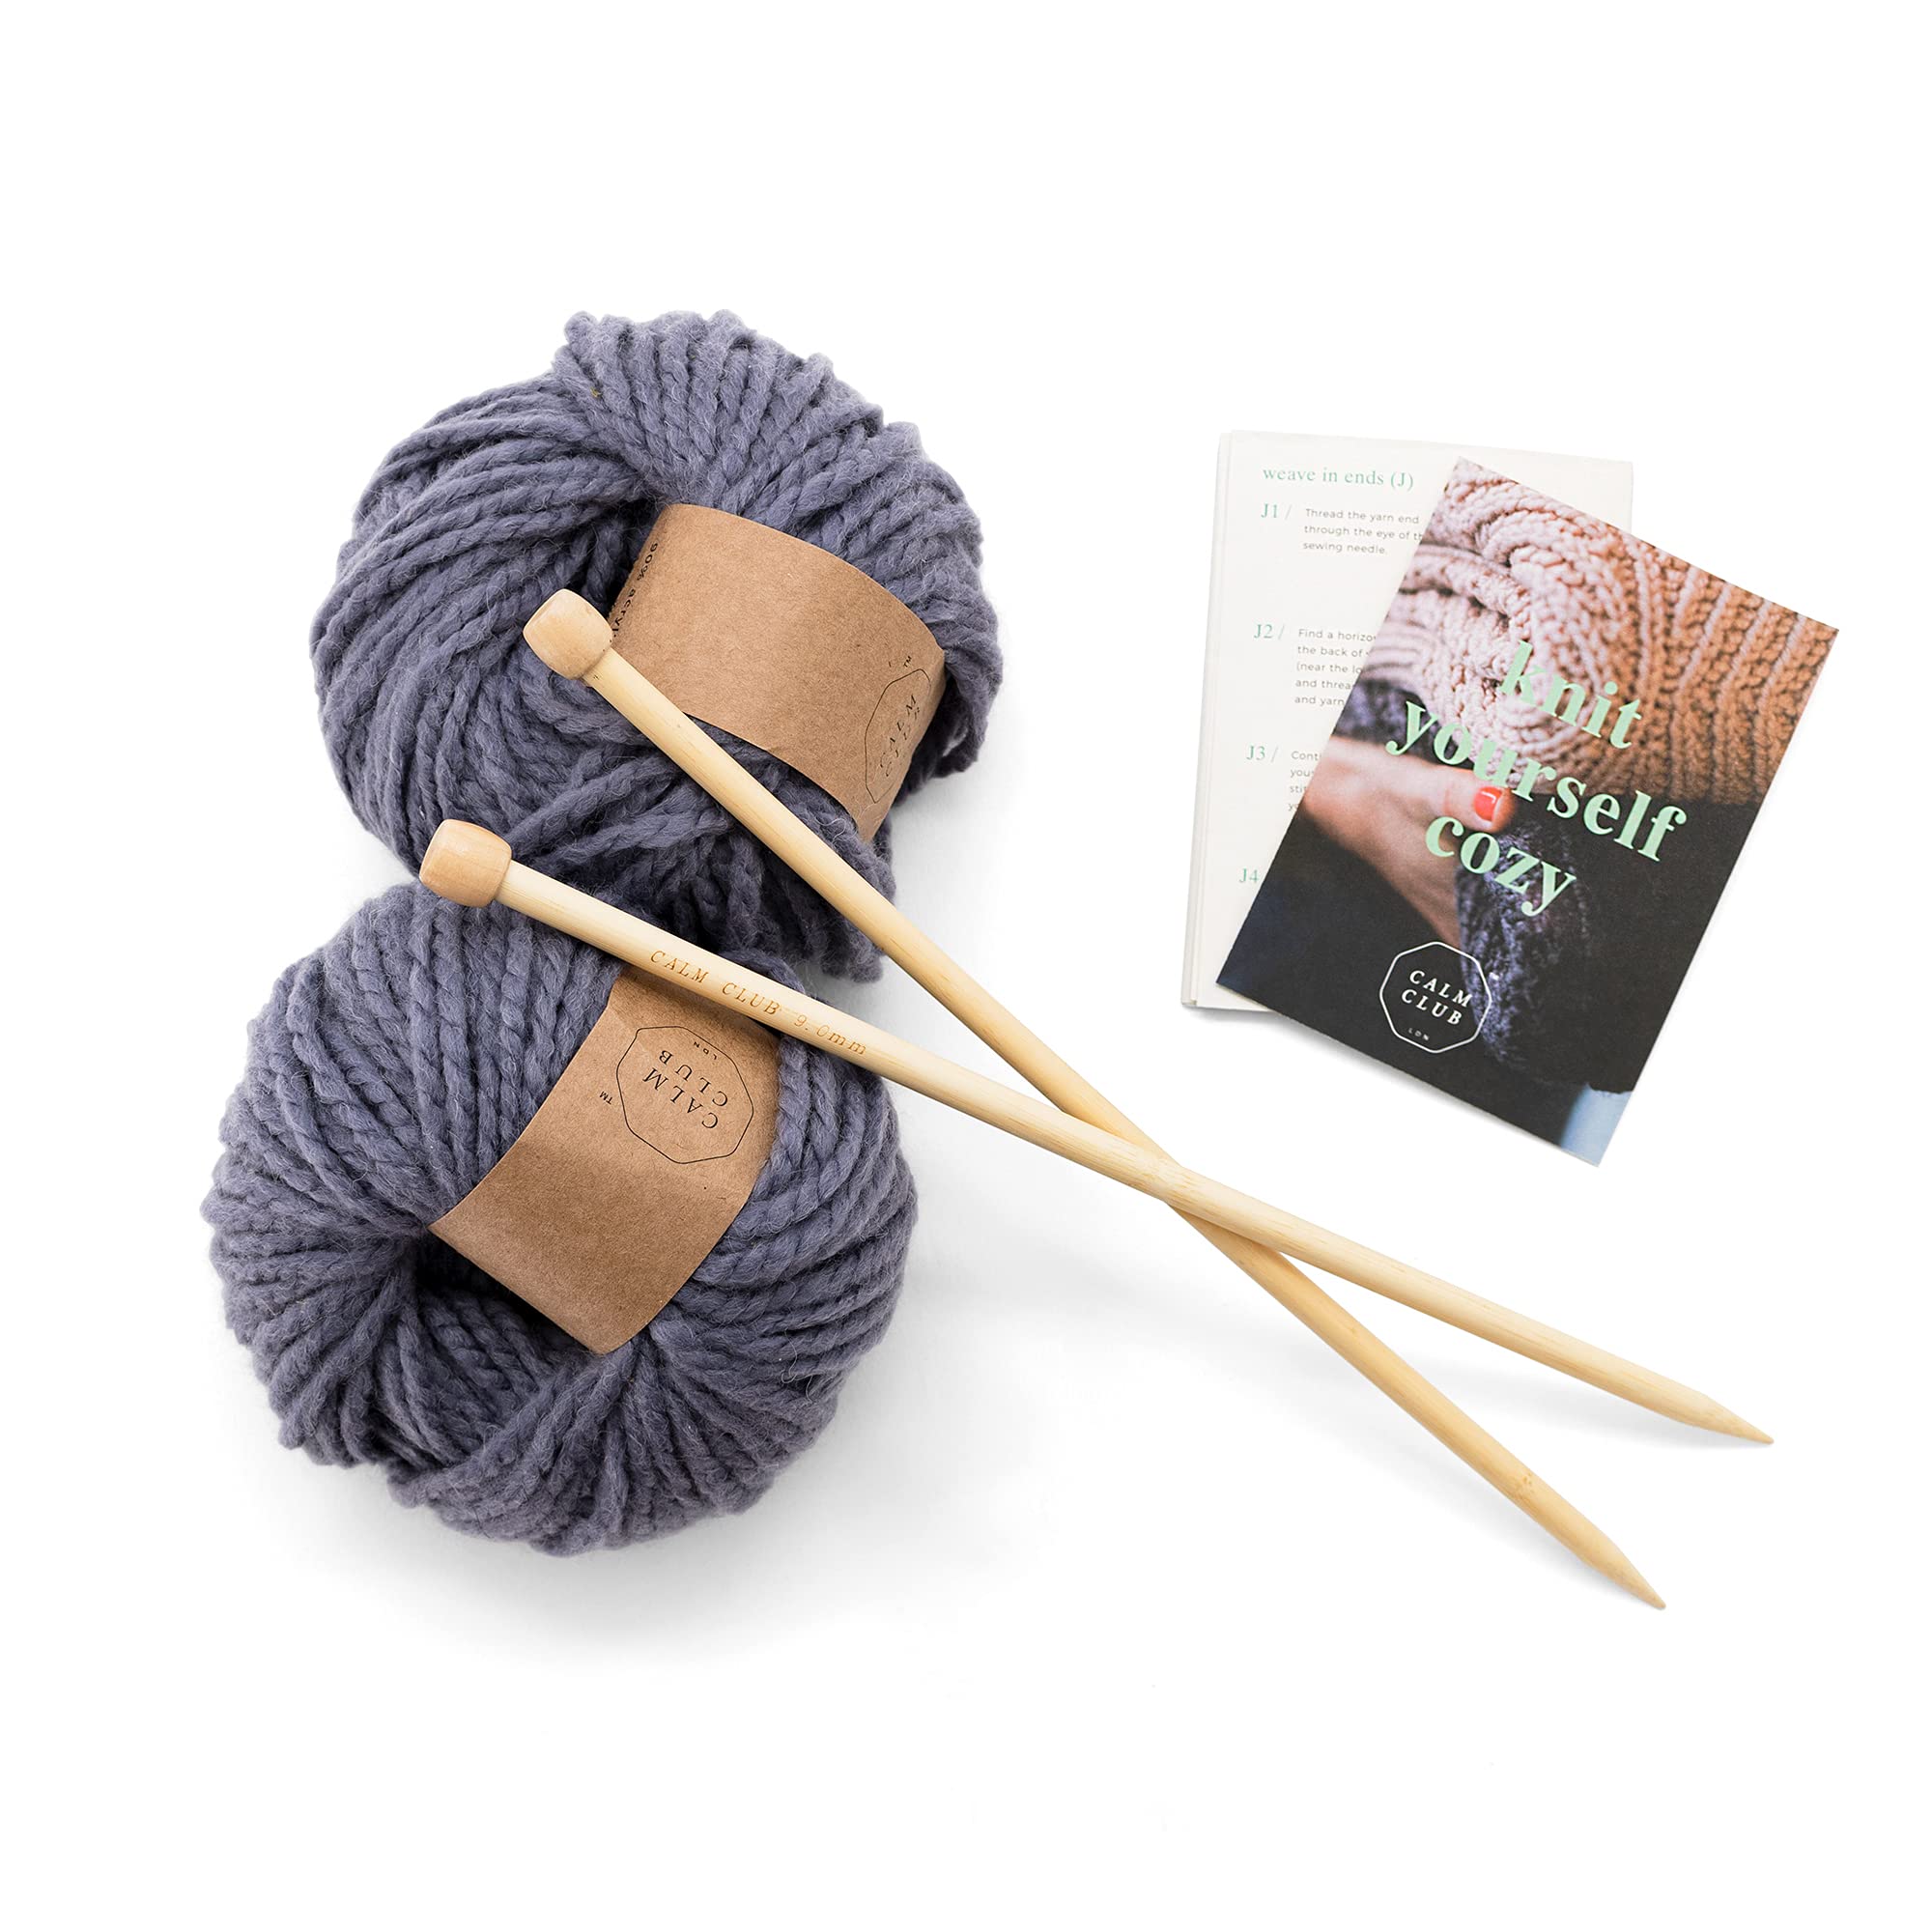 Calm Club, Knitting Kit & Guide, Crochet A Chunky Knit Blanket, Craft  Kits For Adults, Crochet Kit For Beginners, Includes Chunky Yarn, Knitting  Needles, & Starter Guide